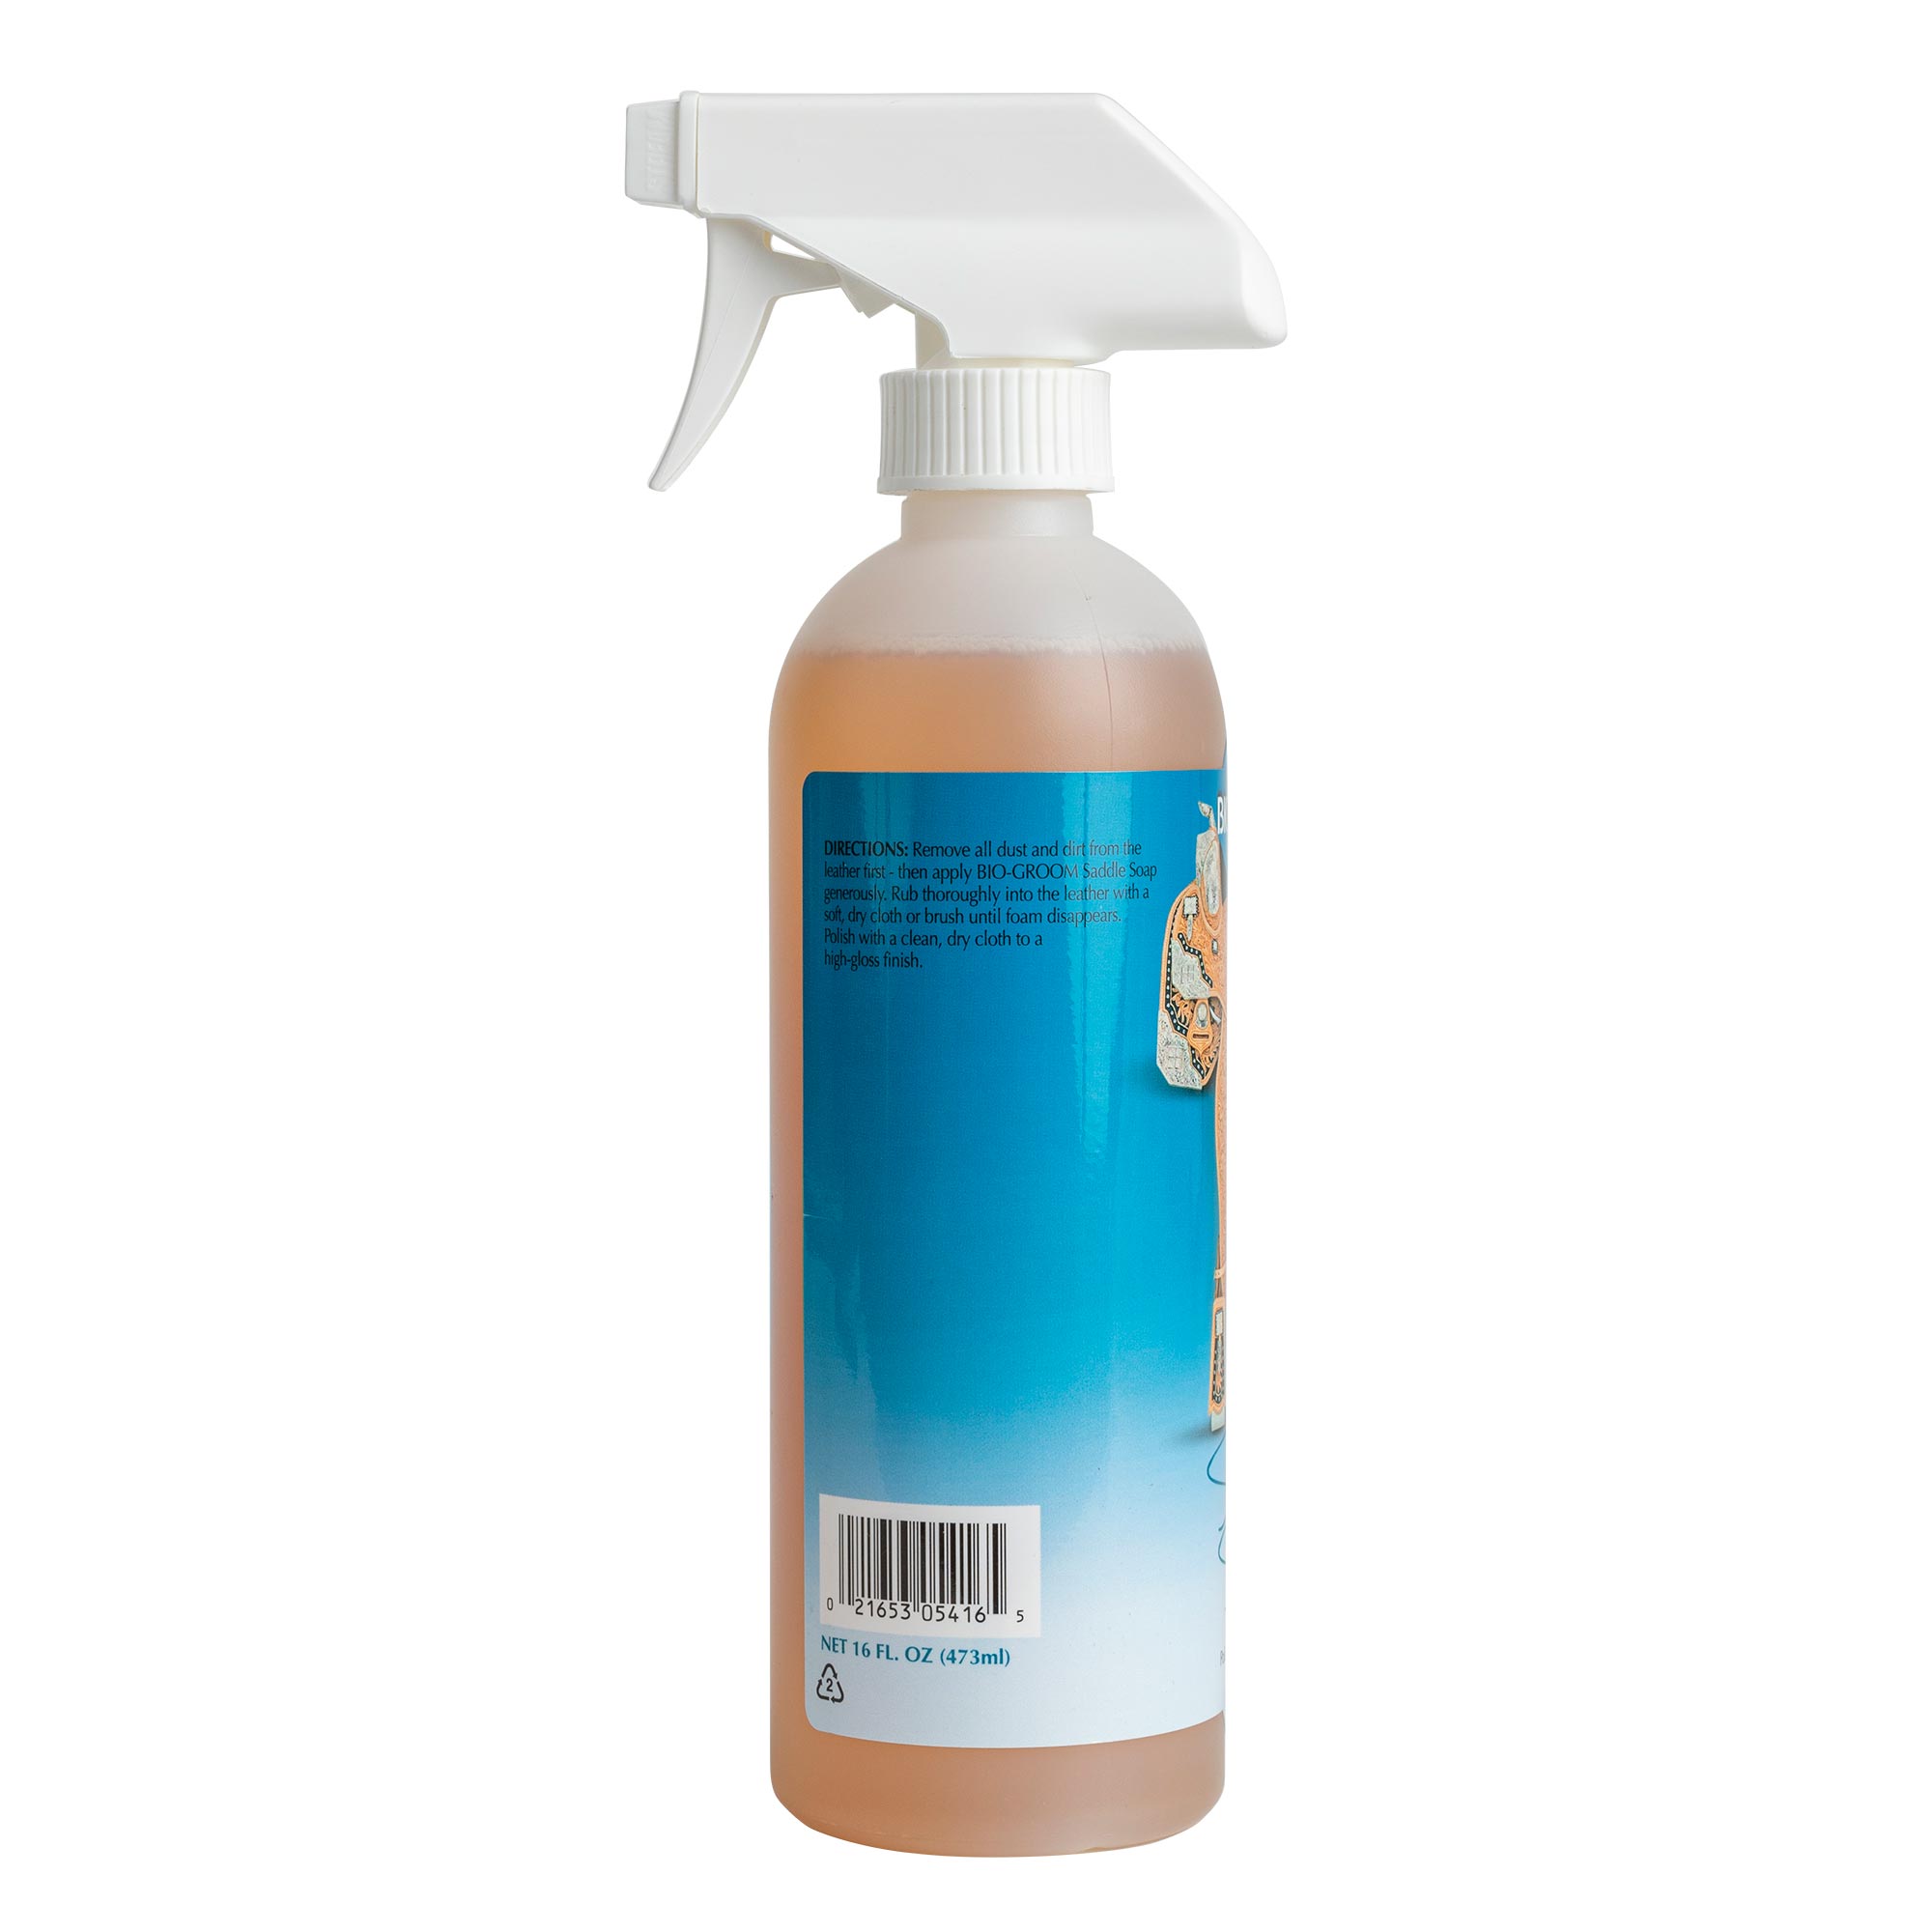 Absolutely Clean Amazing Saddle Soap Spray for Leather Cleaning